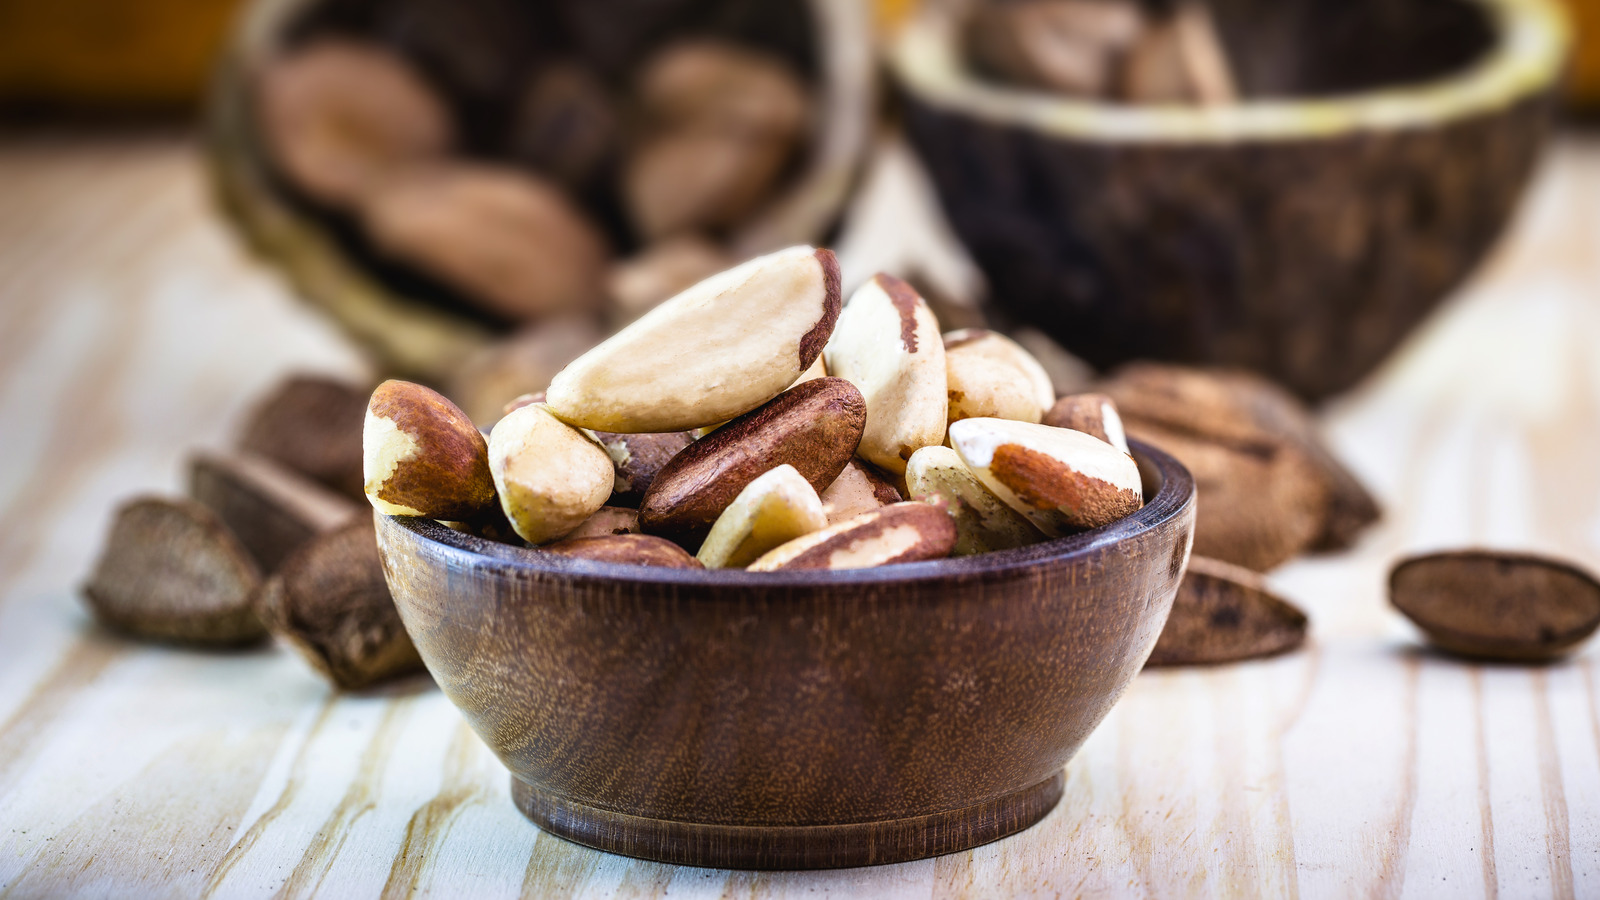 The Amount Of Brazil Nuts You Can Have Before It Becomes Toxic